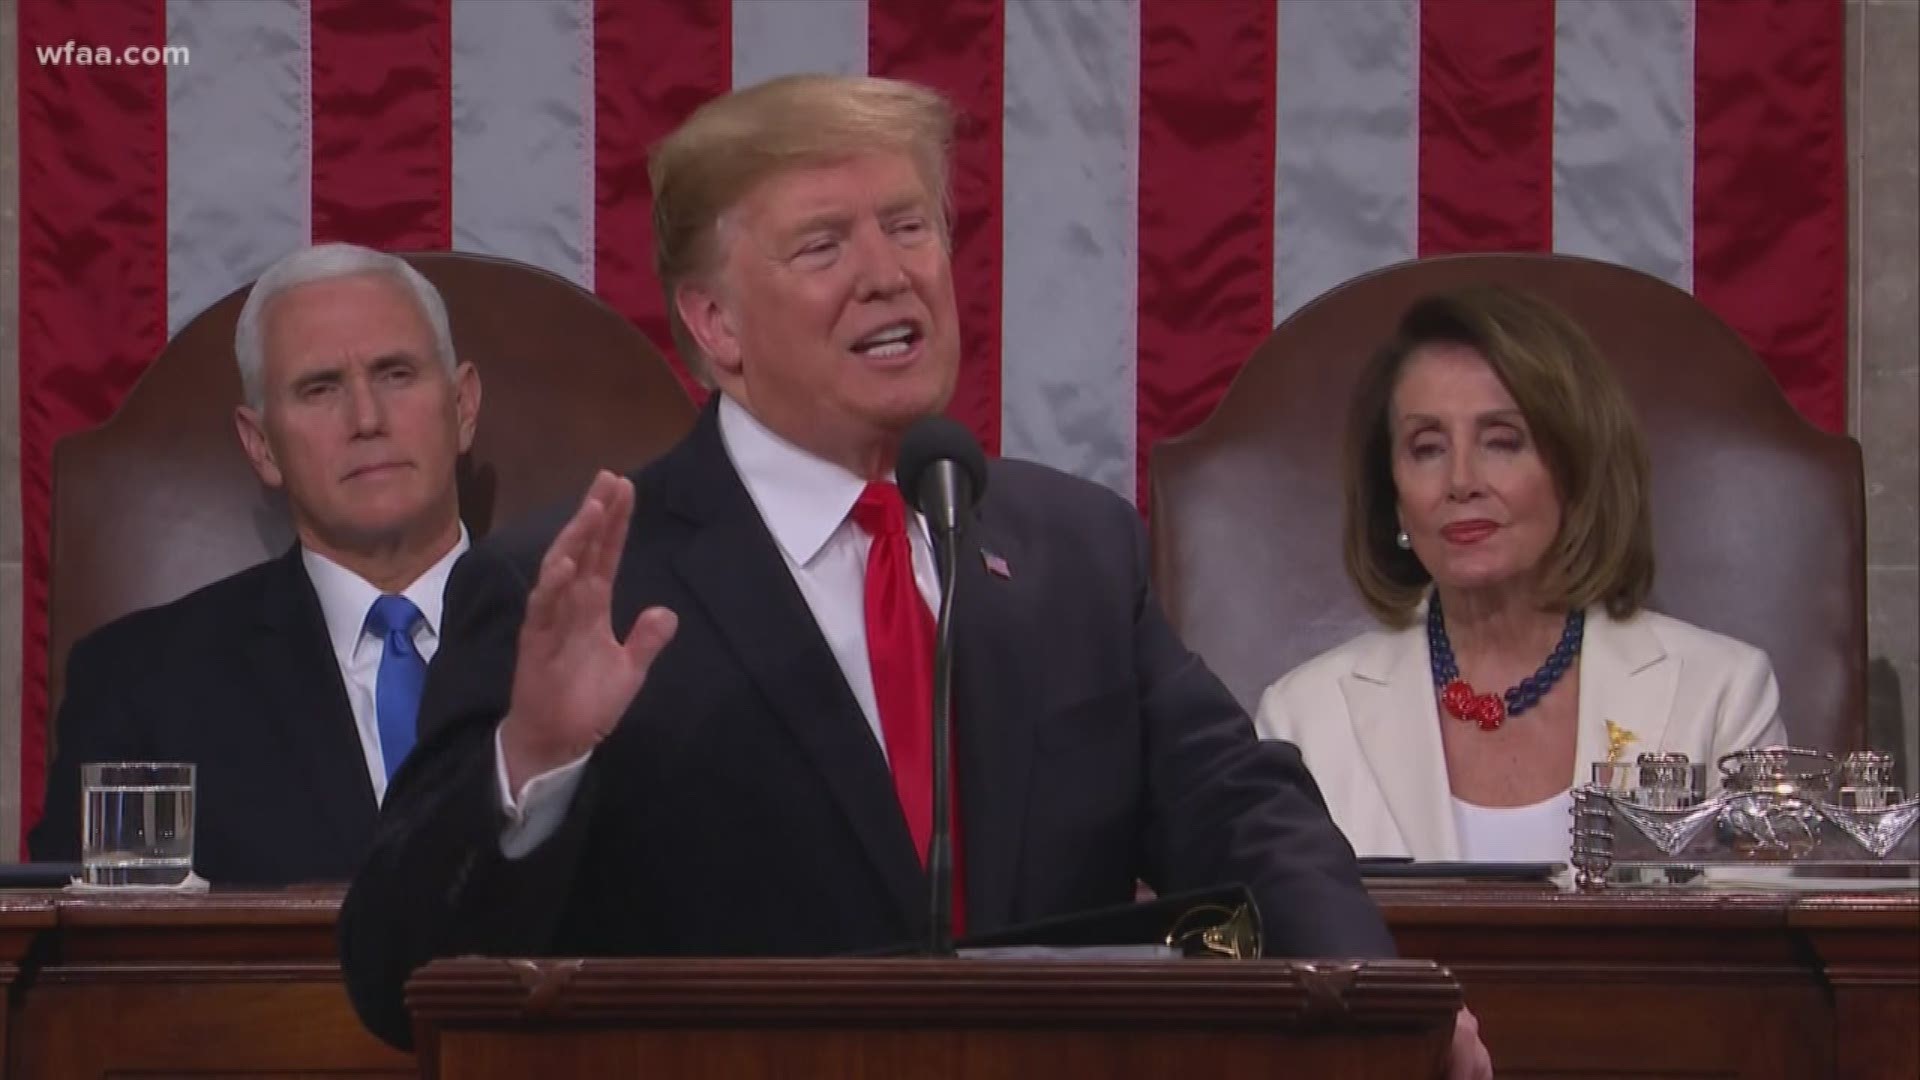 The border wall and immigration were key aspects of the president's second State of the Union address.